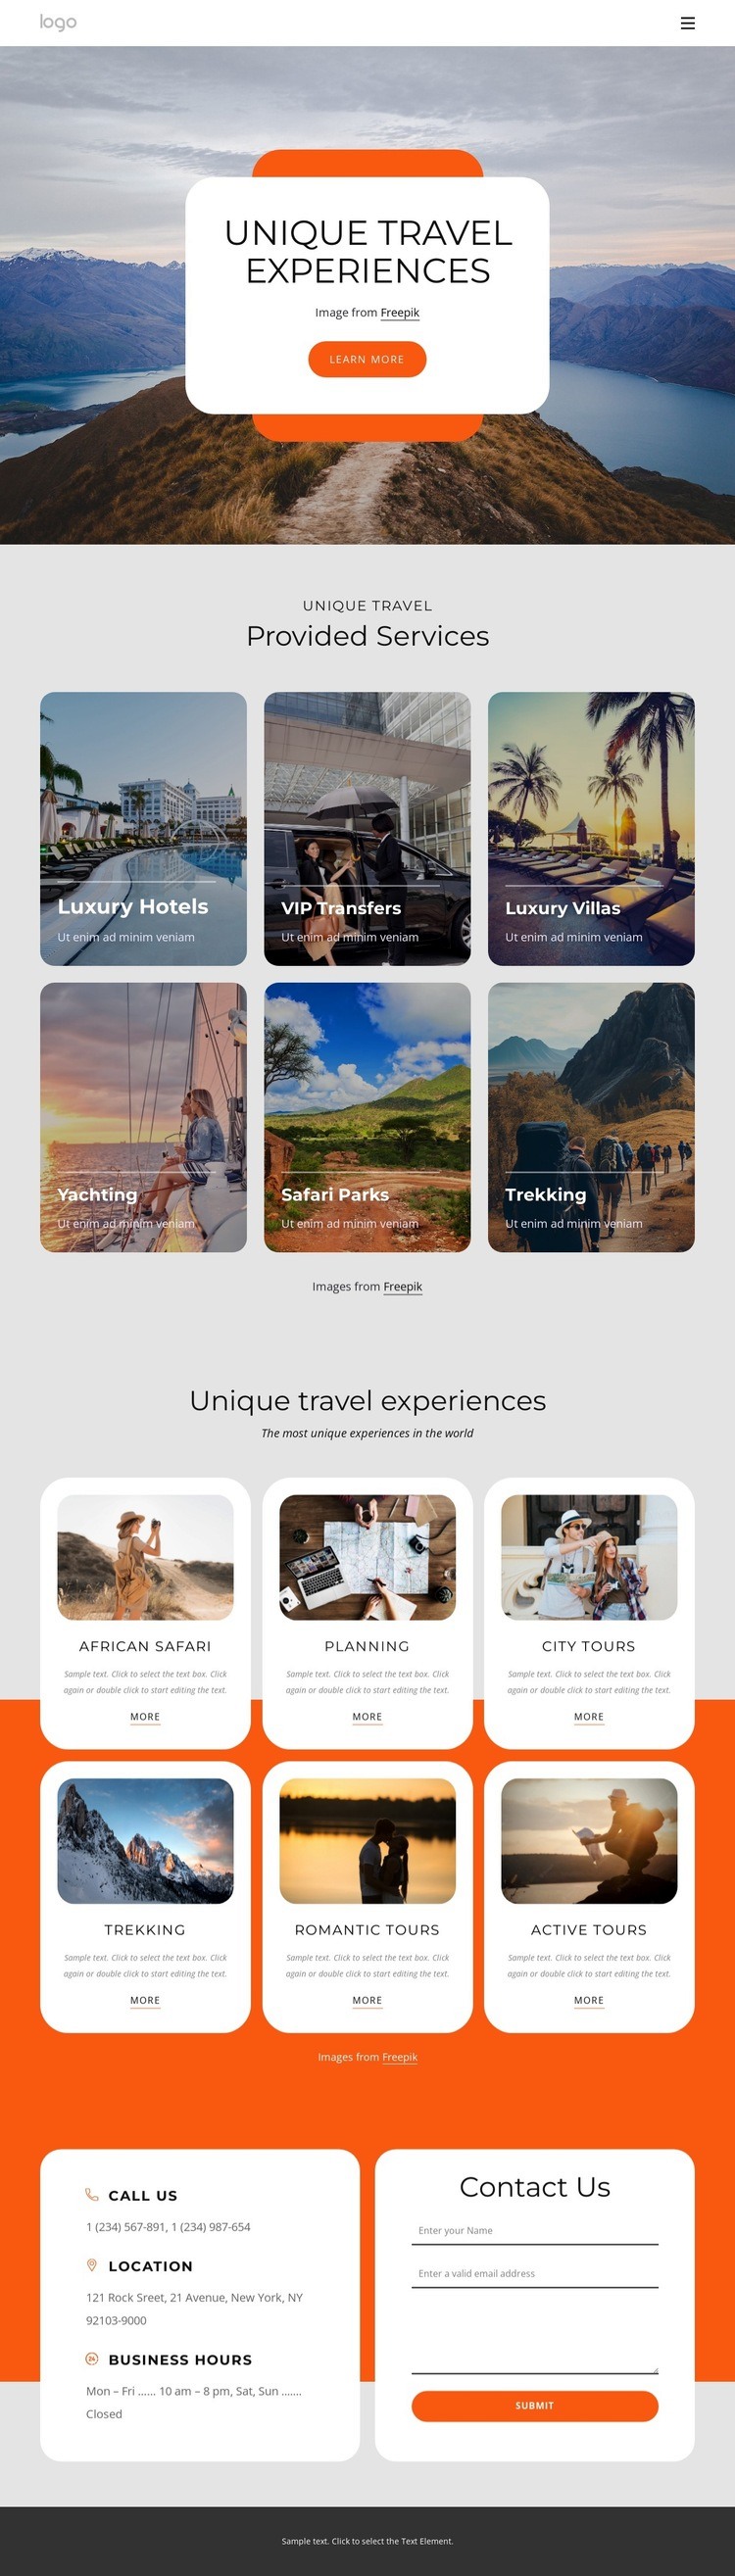 Luxury small-group travel experience Homepage Design